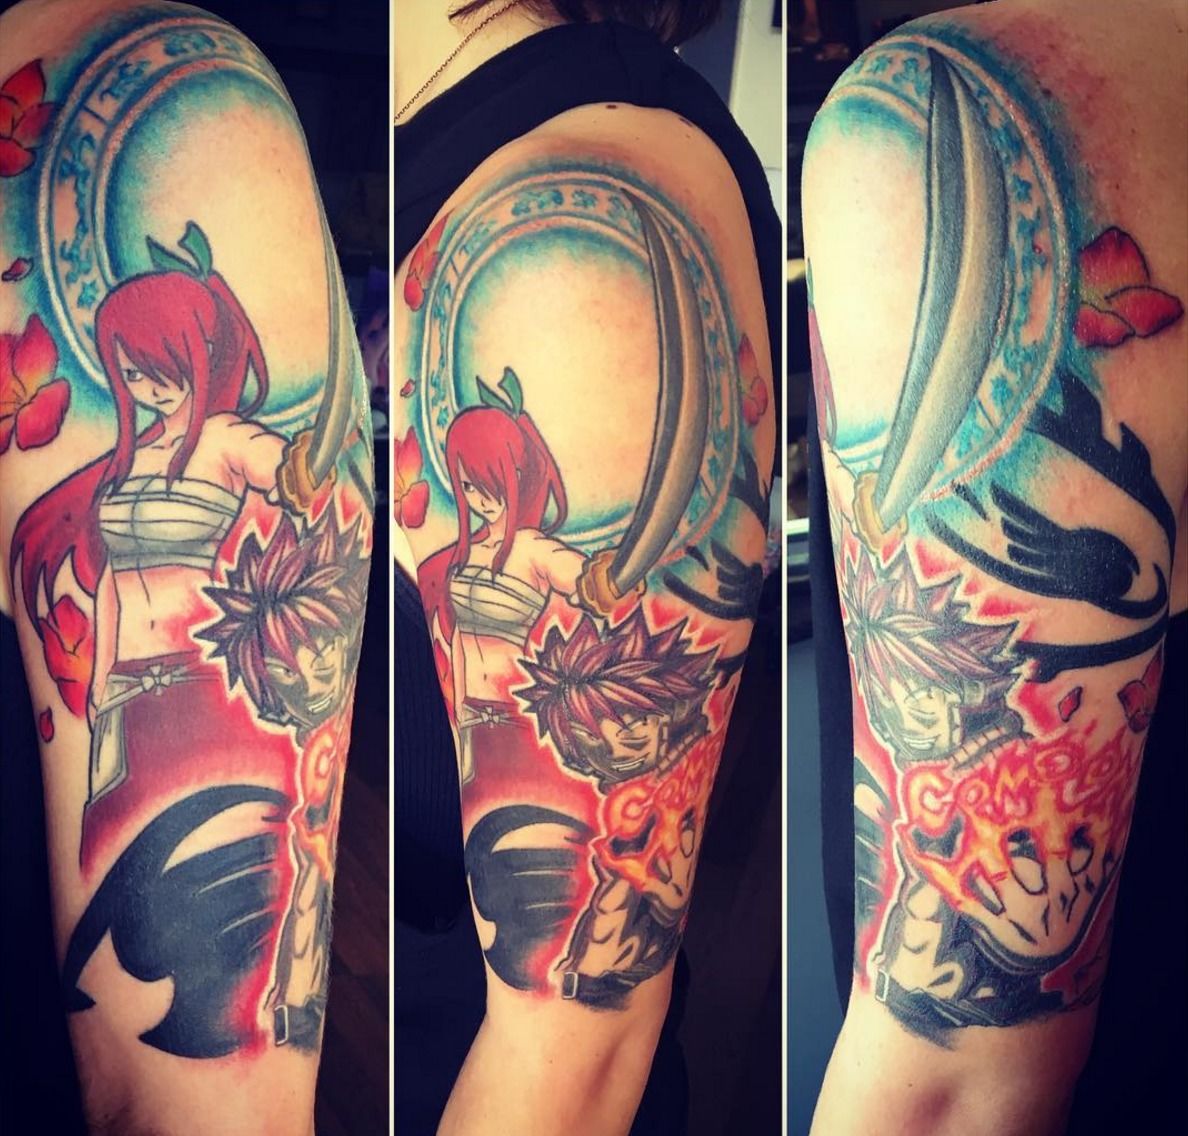 Mix of old school and new school anime. Half sleeve complete. Artist -  iFunny Brazil